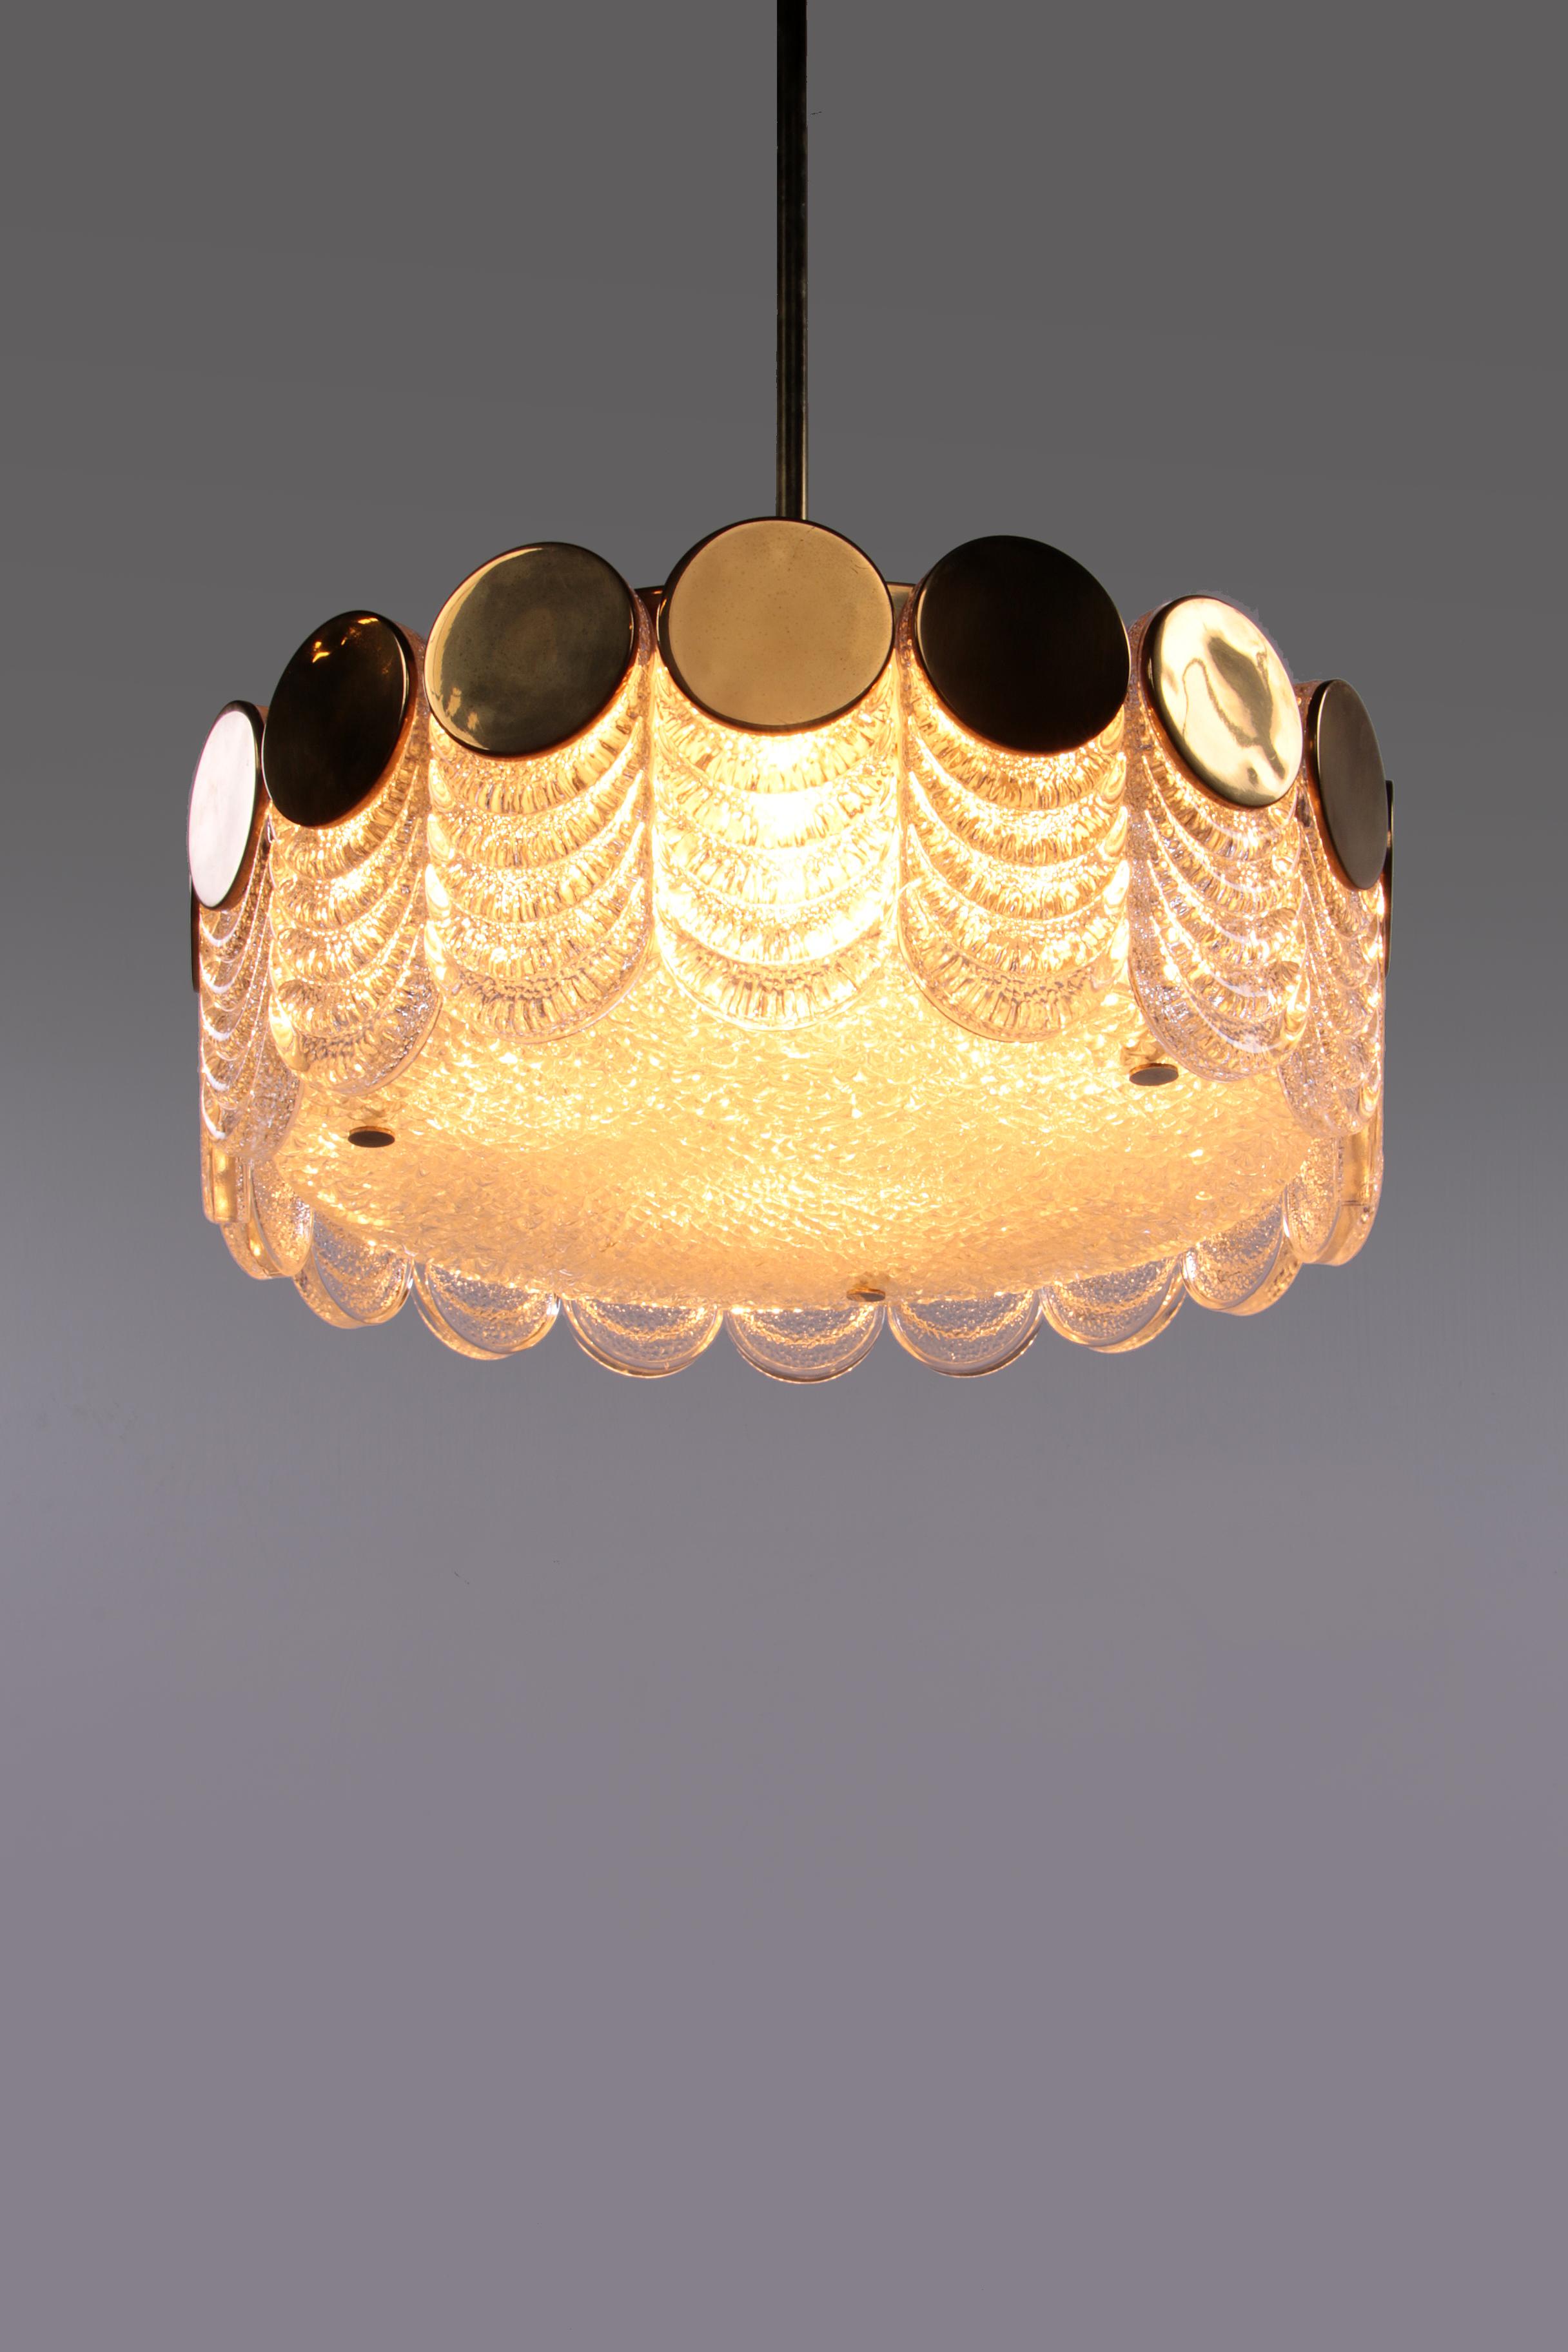 Mid-20th Century Hollywood Regency Hanging Lamp by Kaiser Leuchten, 1960 Germany